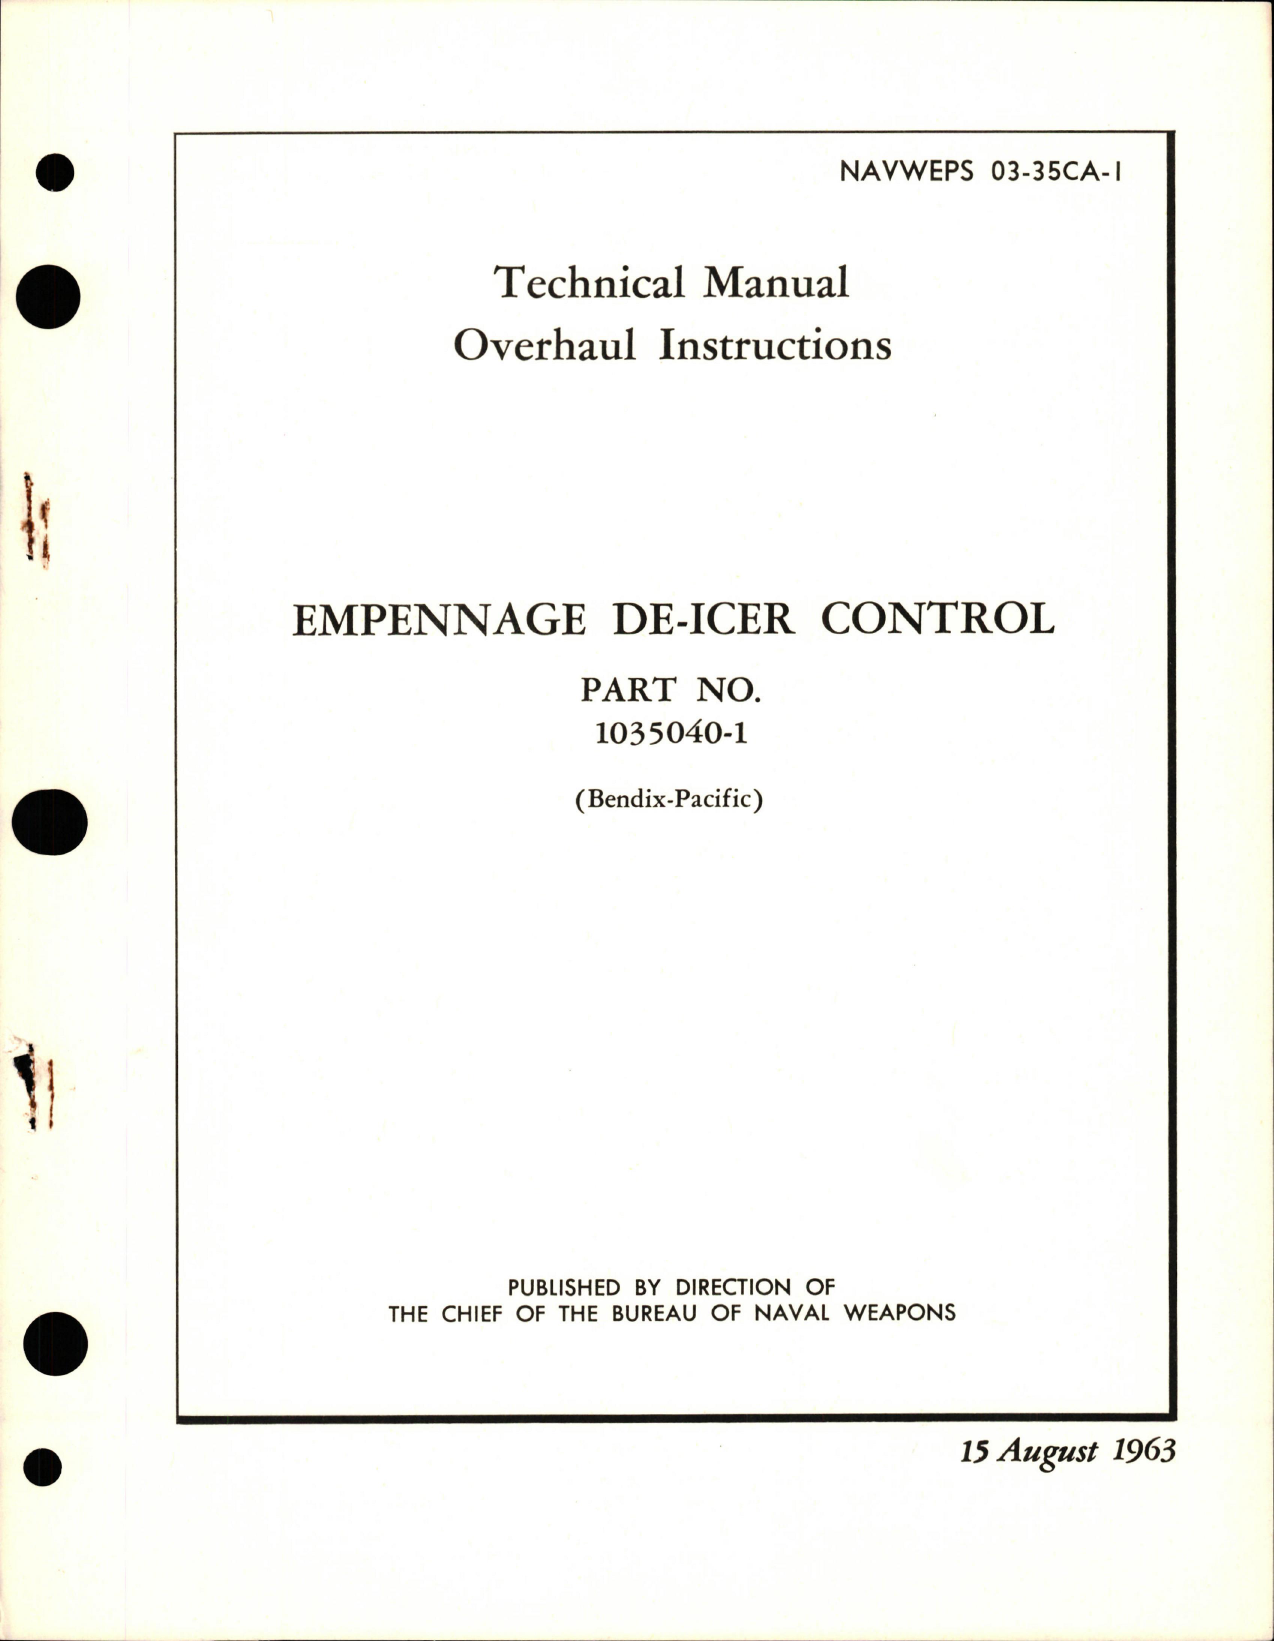 Sample page 1 from AirCorps Library document: Overhaul Instructions for Empennage De-Icer Control - Part 1035040-1